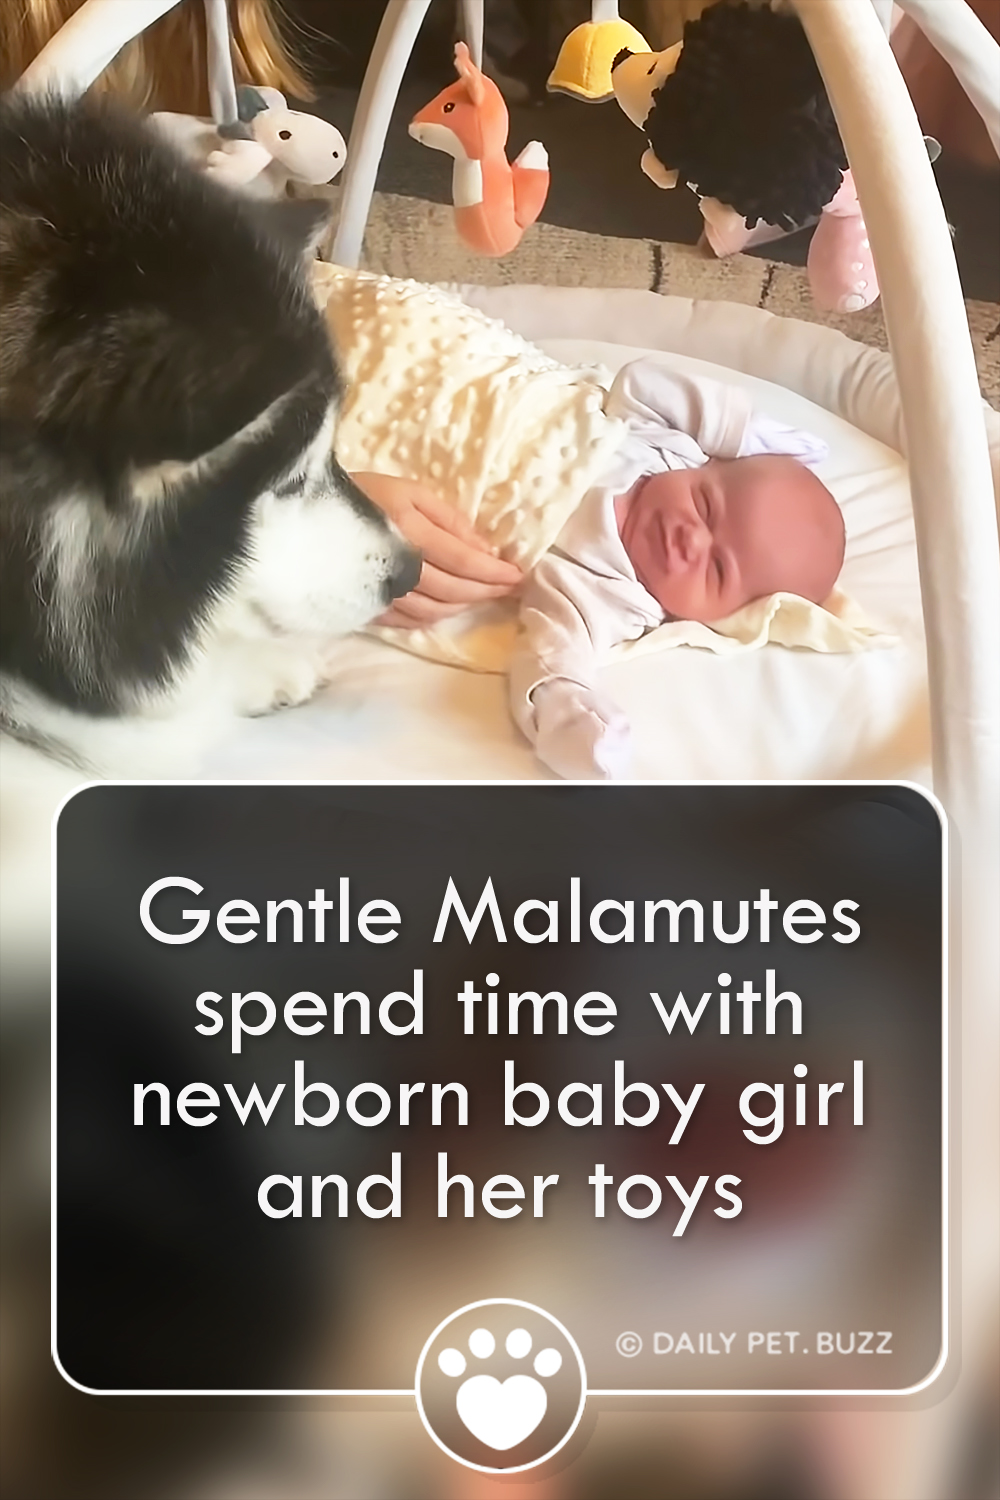 Gentle Malamutes spend time with newborn baby girl and her toys